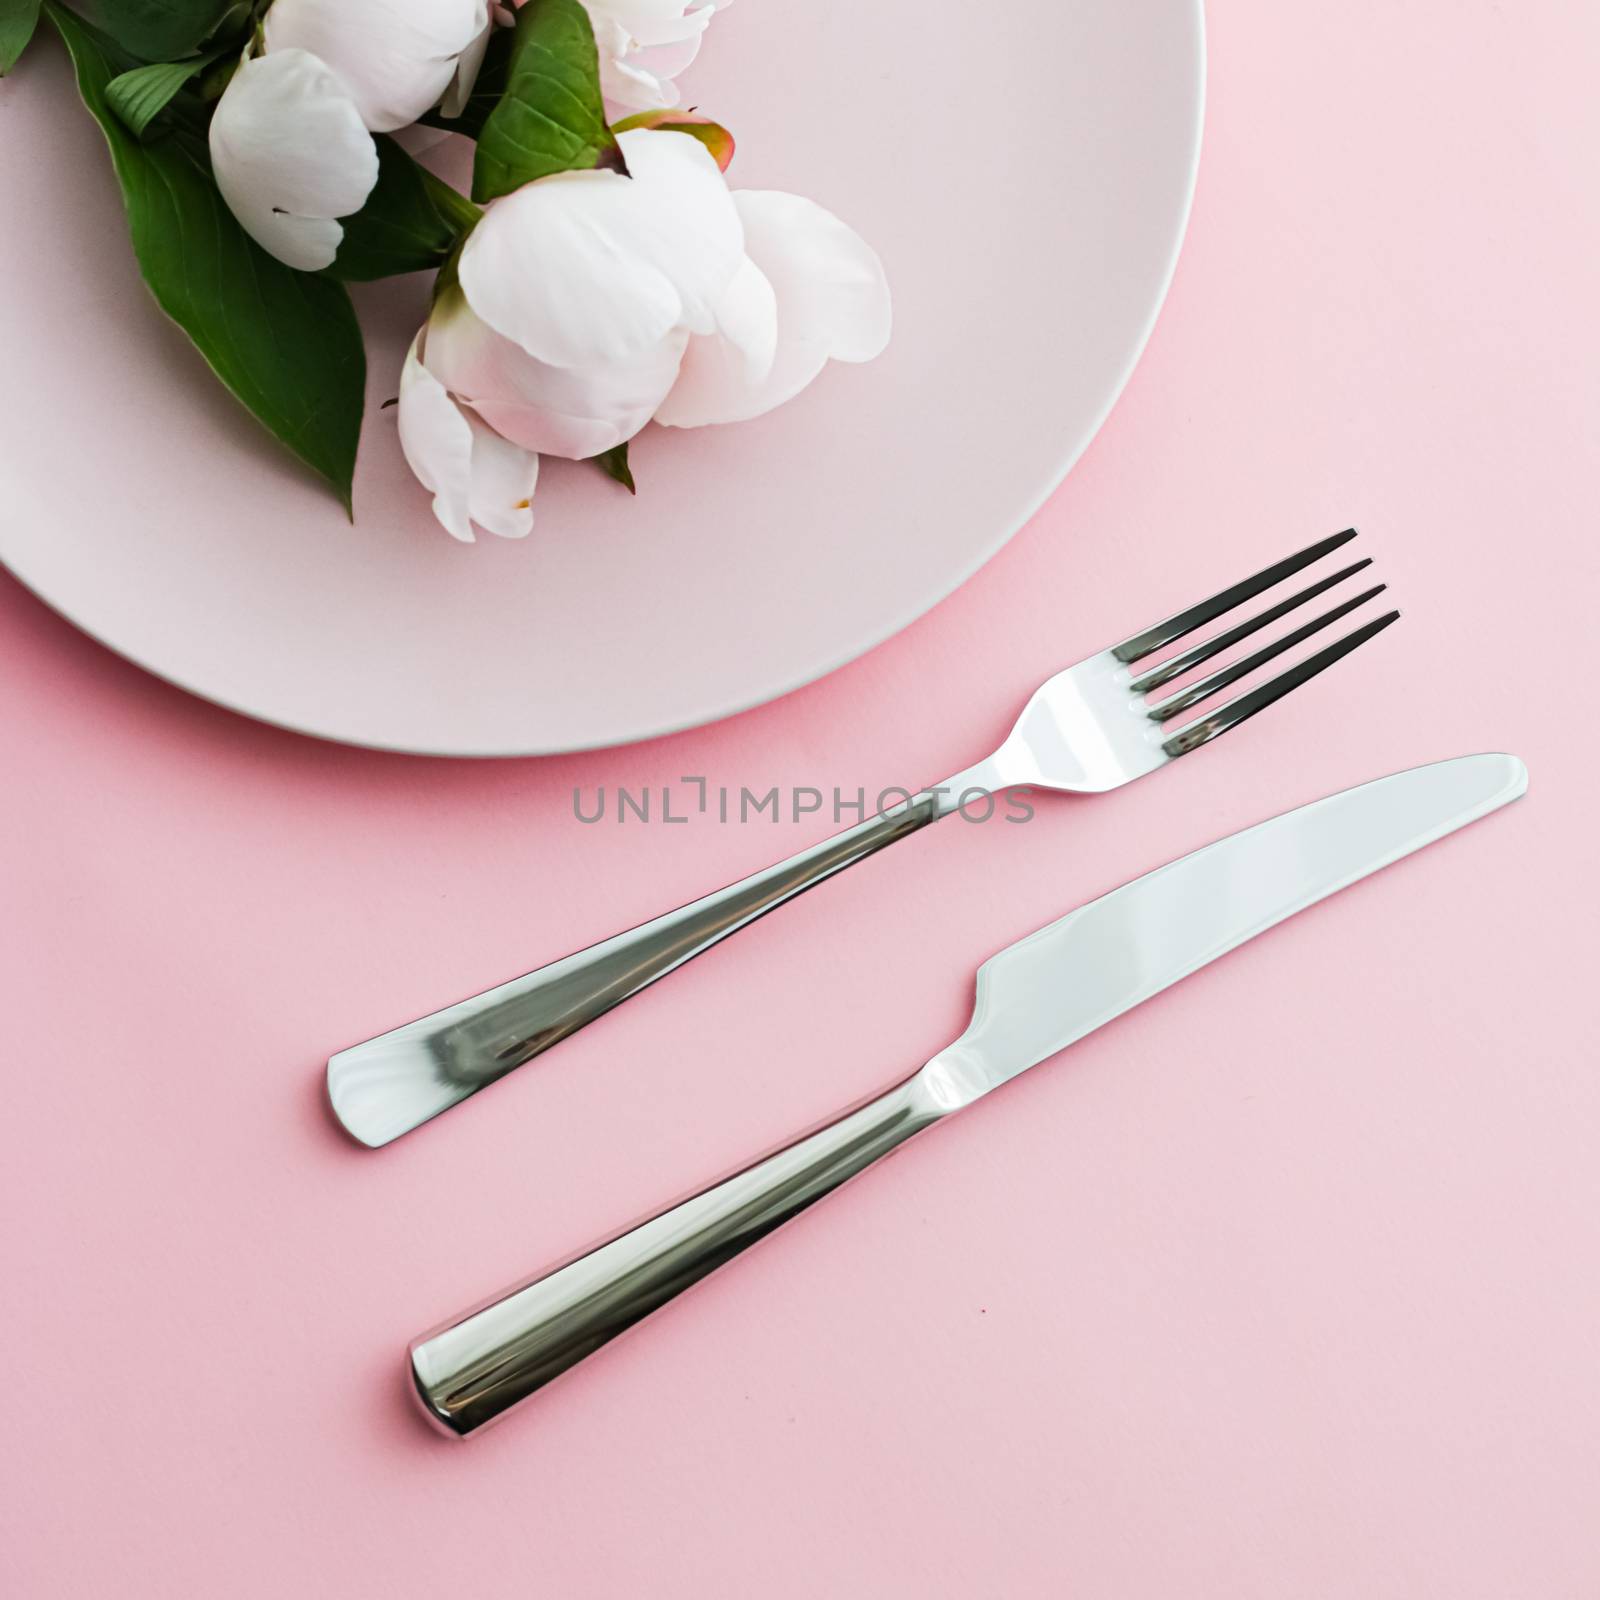 Dining plate and cutlery with peony flowers as wedding decor set on pink background, top tableware for event decoration and menu branding by Anneleven